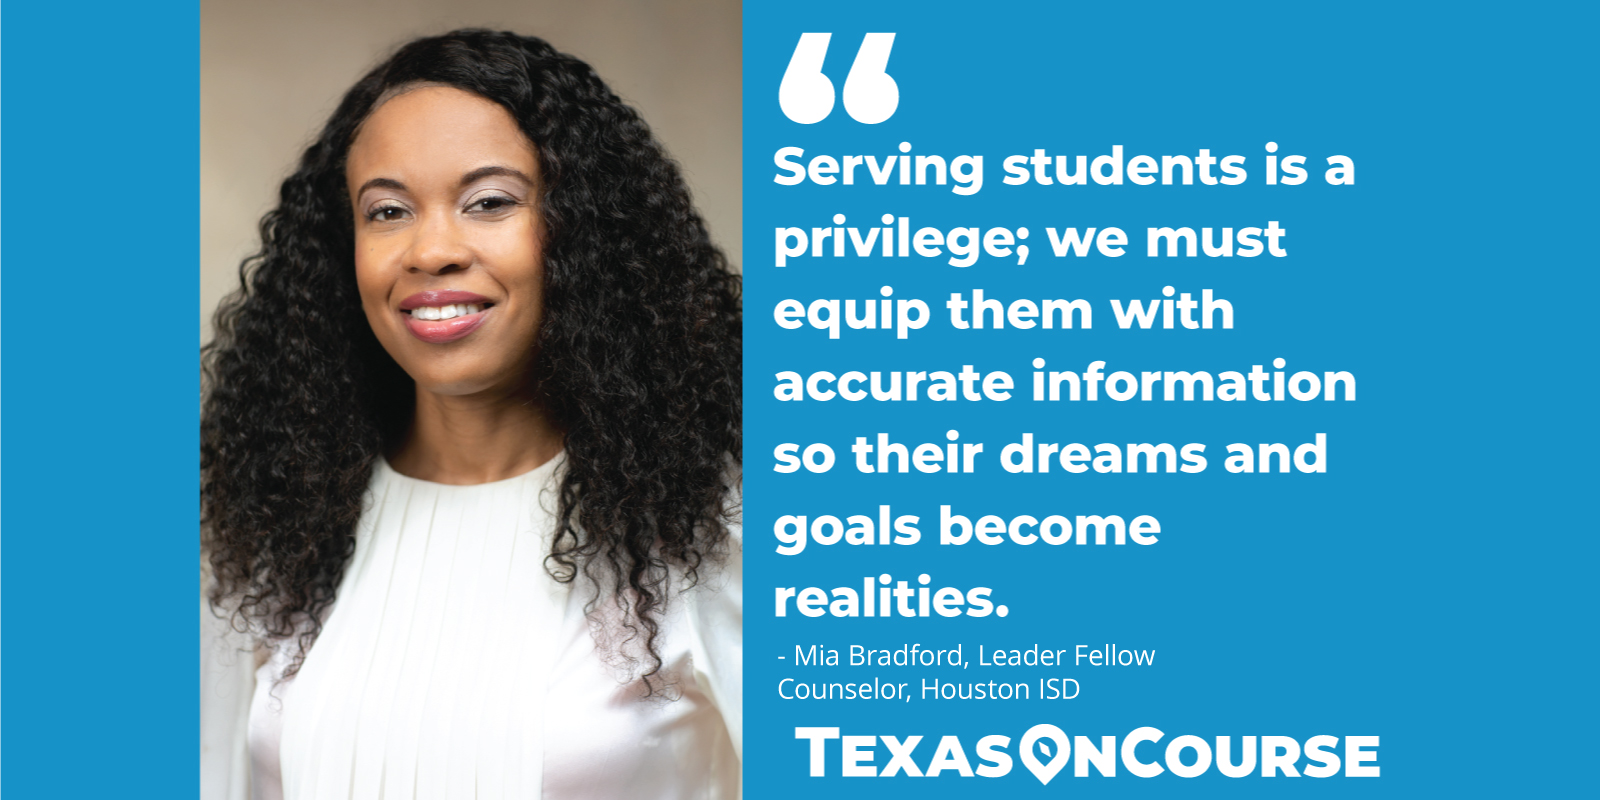 Serving students is a privilege; we must equip them with accurate information so their dreams and goals become realities.